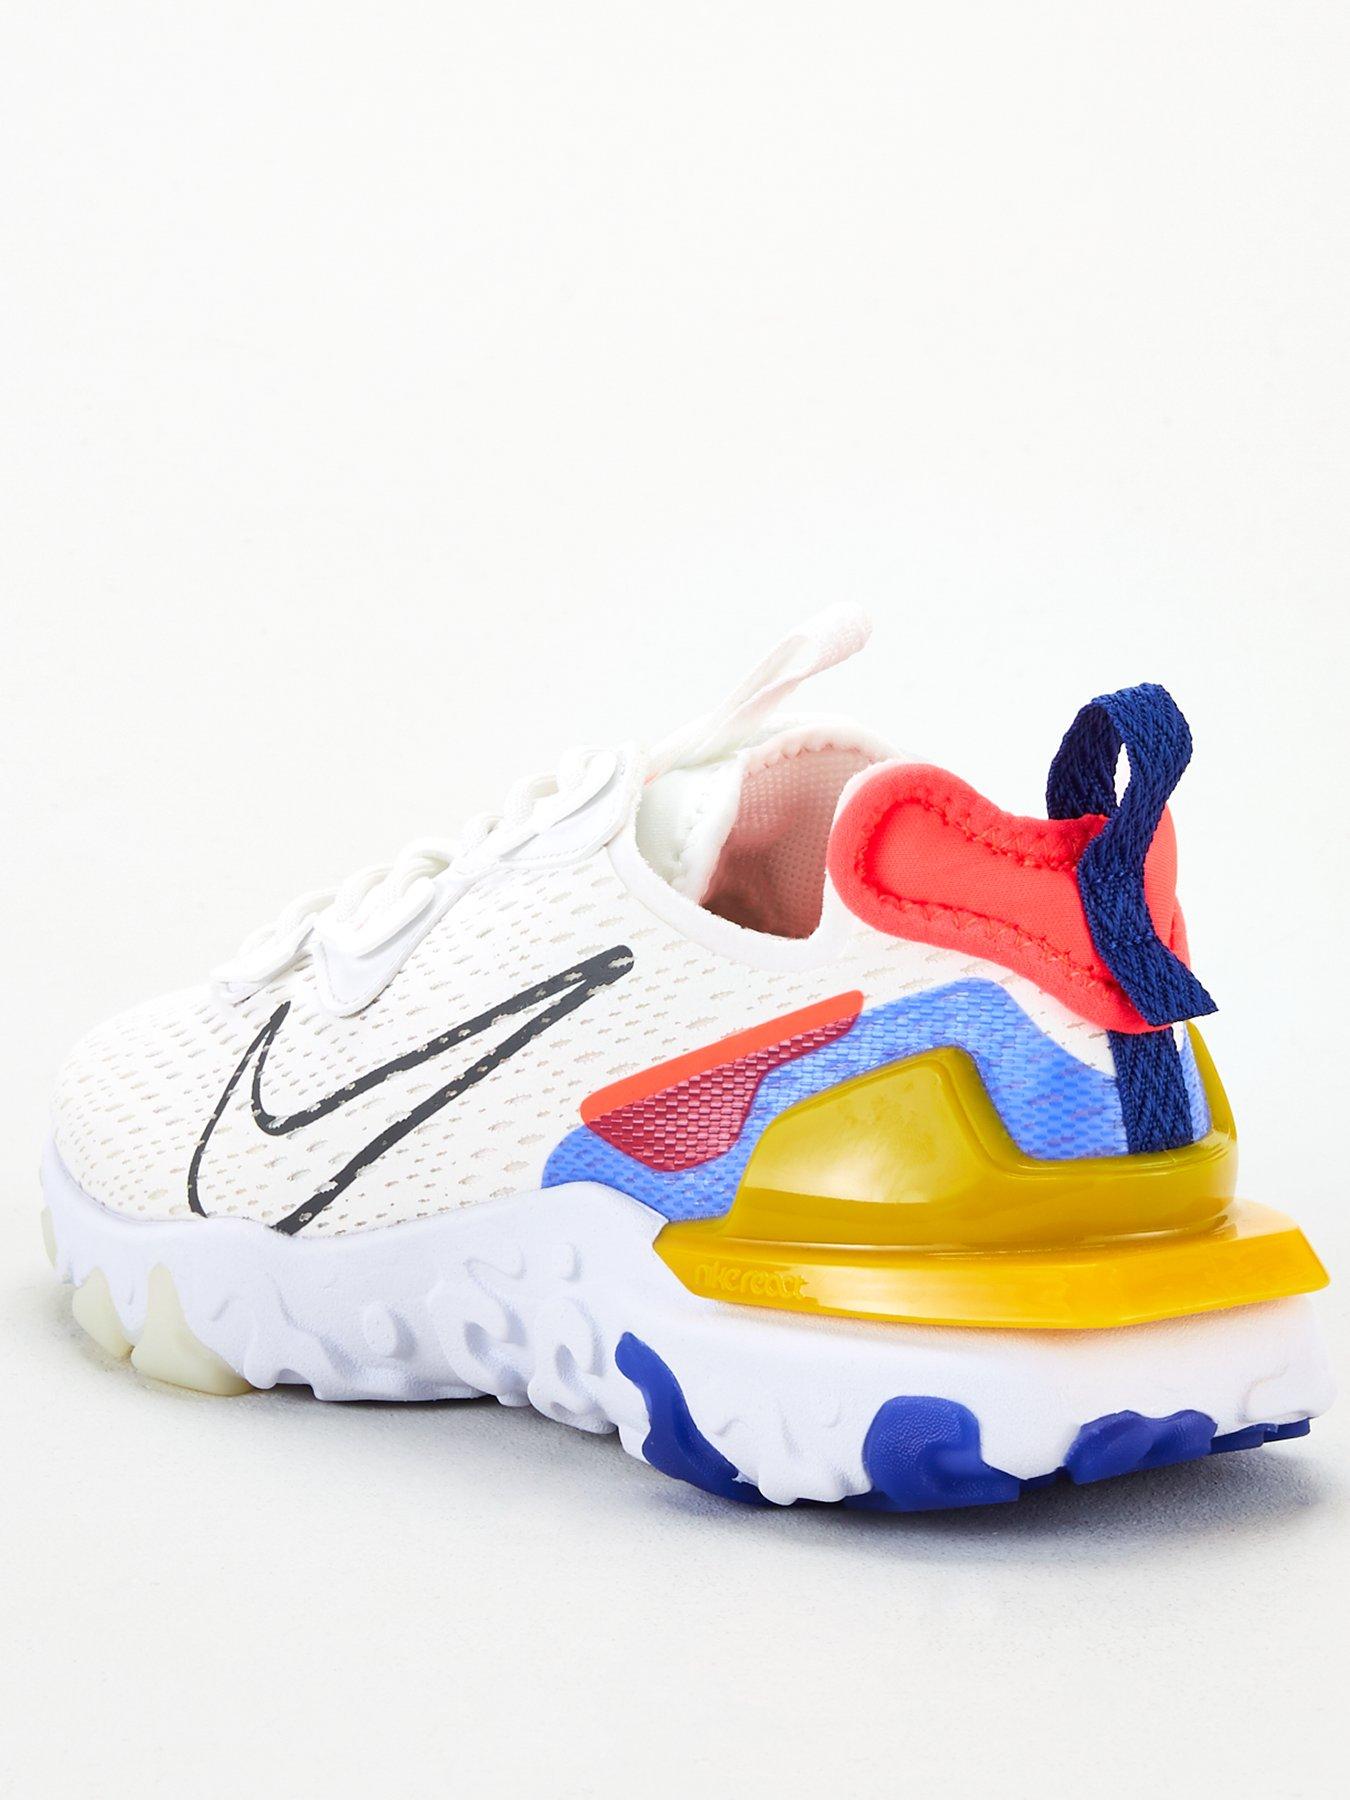 nike react vision trainers in white yellow and pink